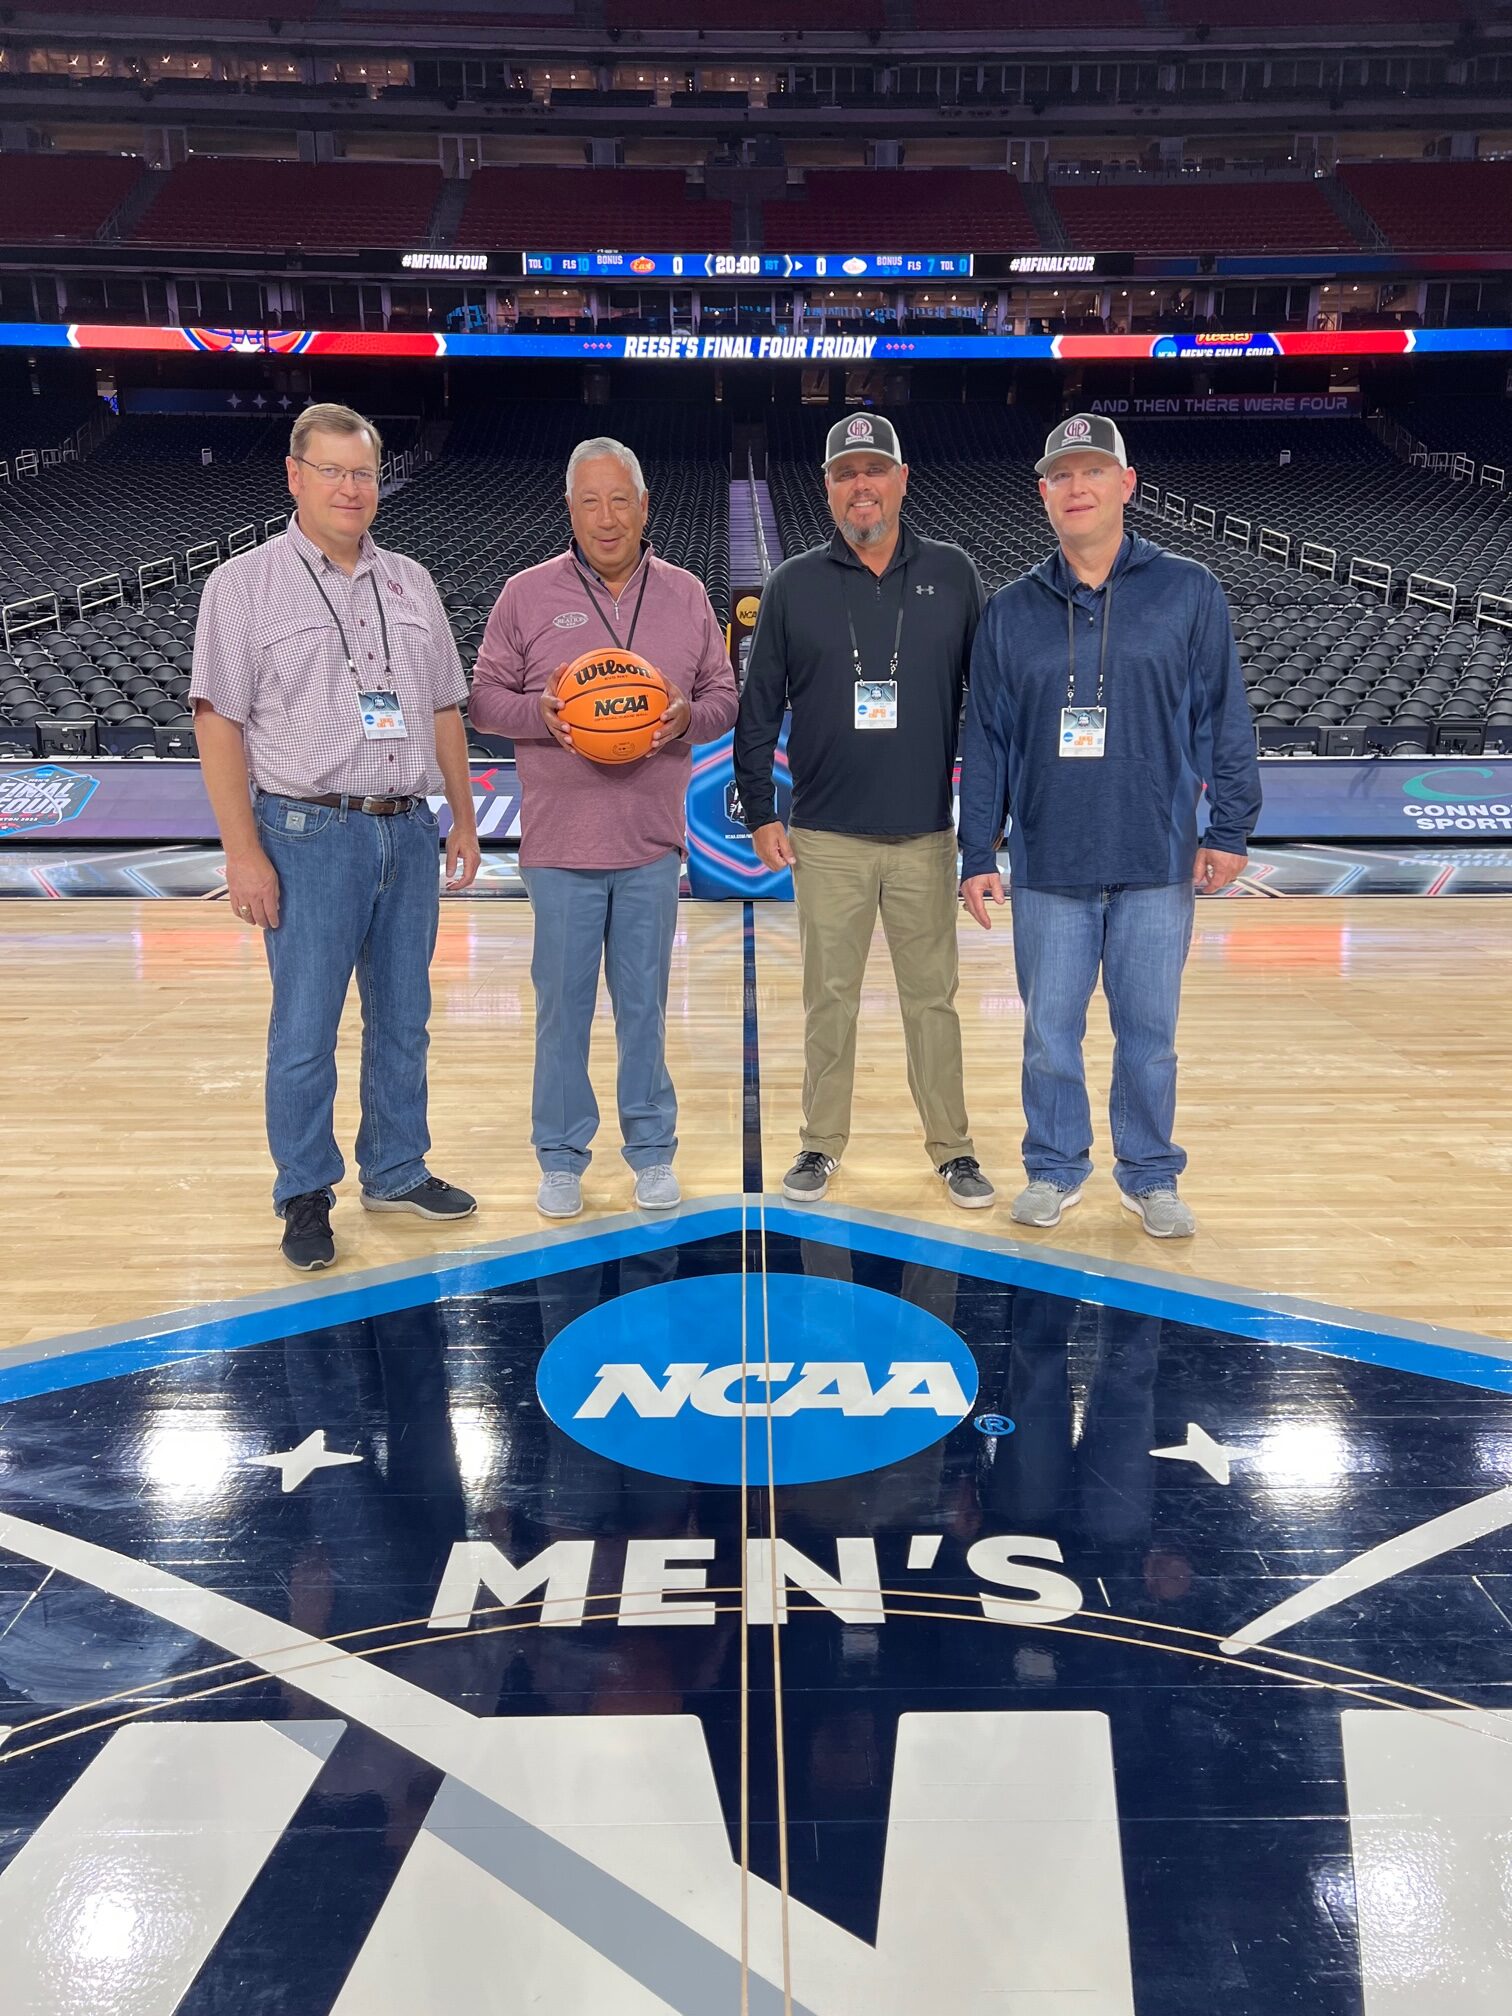 about QHF Sports center court at the 2023 NCAA Men's Final Four